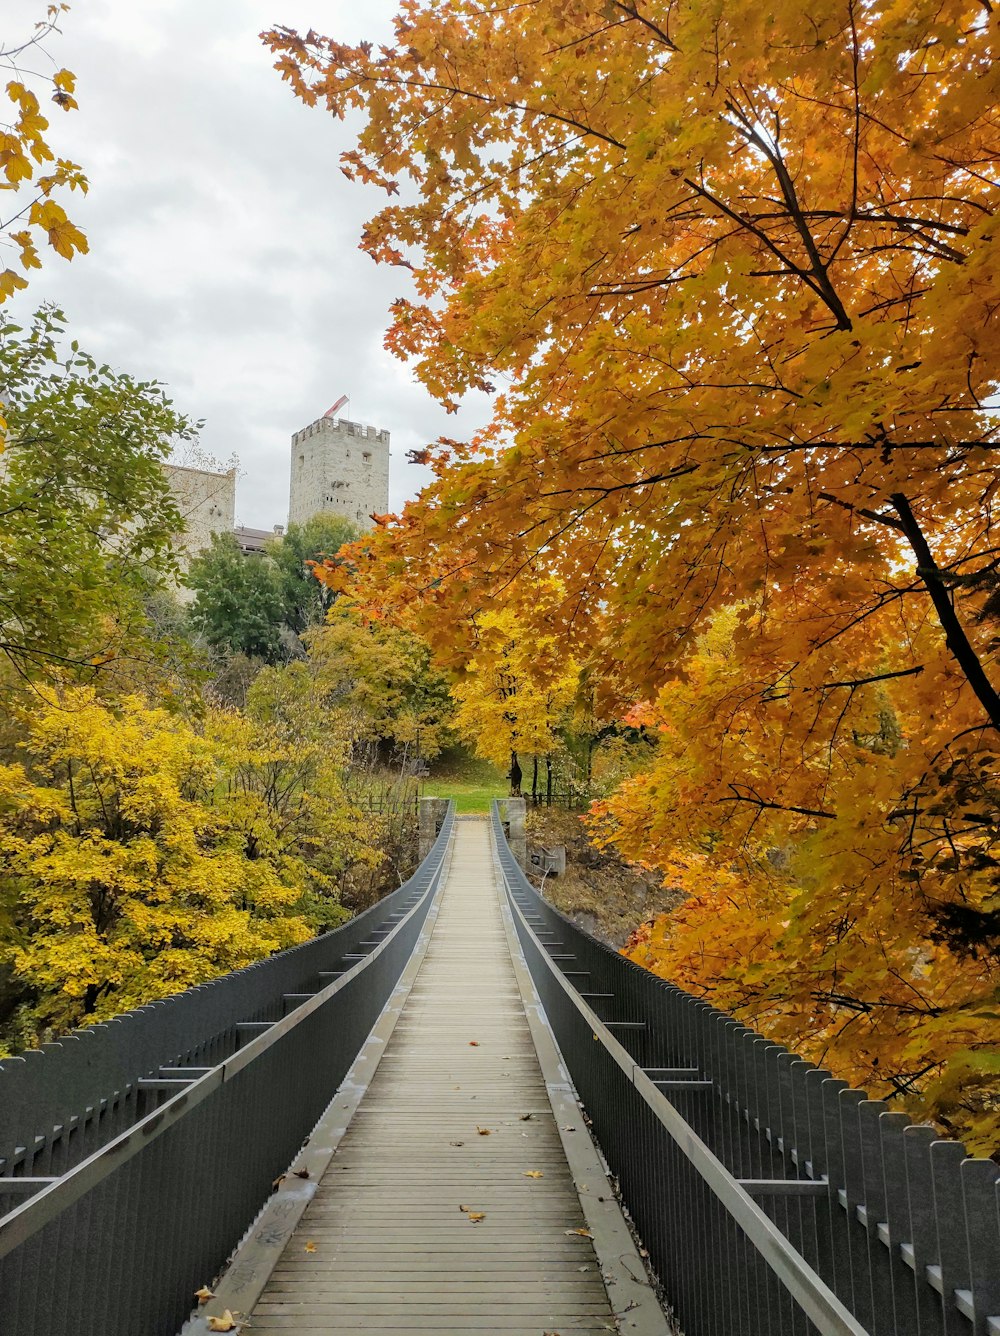 a bridge that is surrounded by trees with yellow leaves